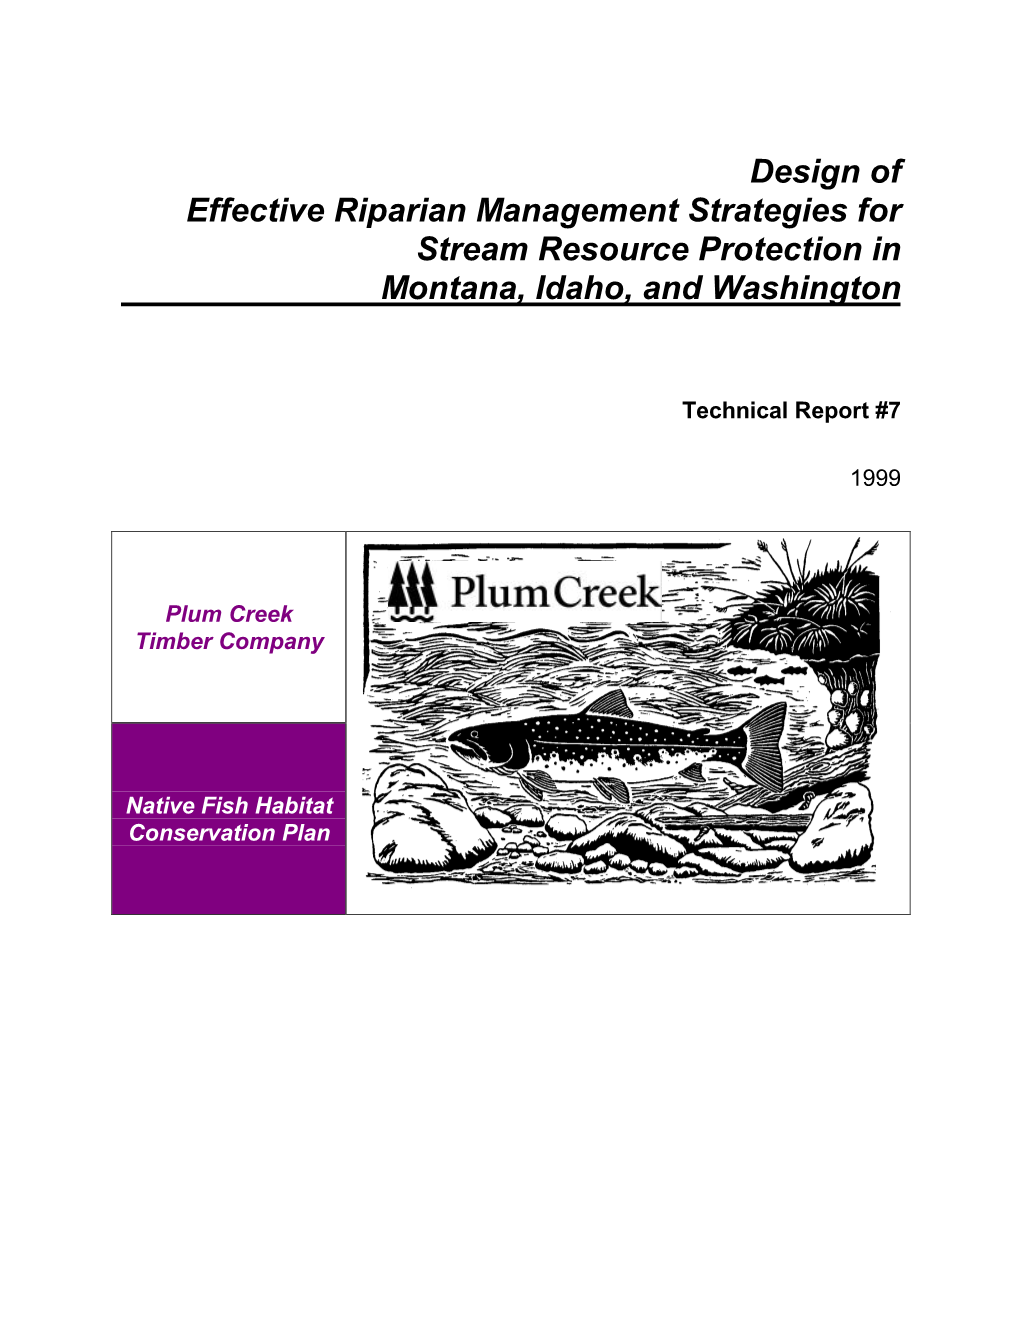 Design of Effective Riparian Management Strategies for Stream Resource Protection in Montana, Idaho, and Washington